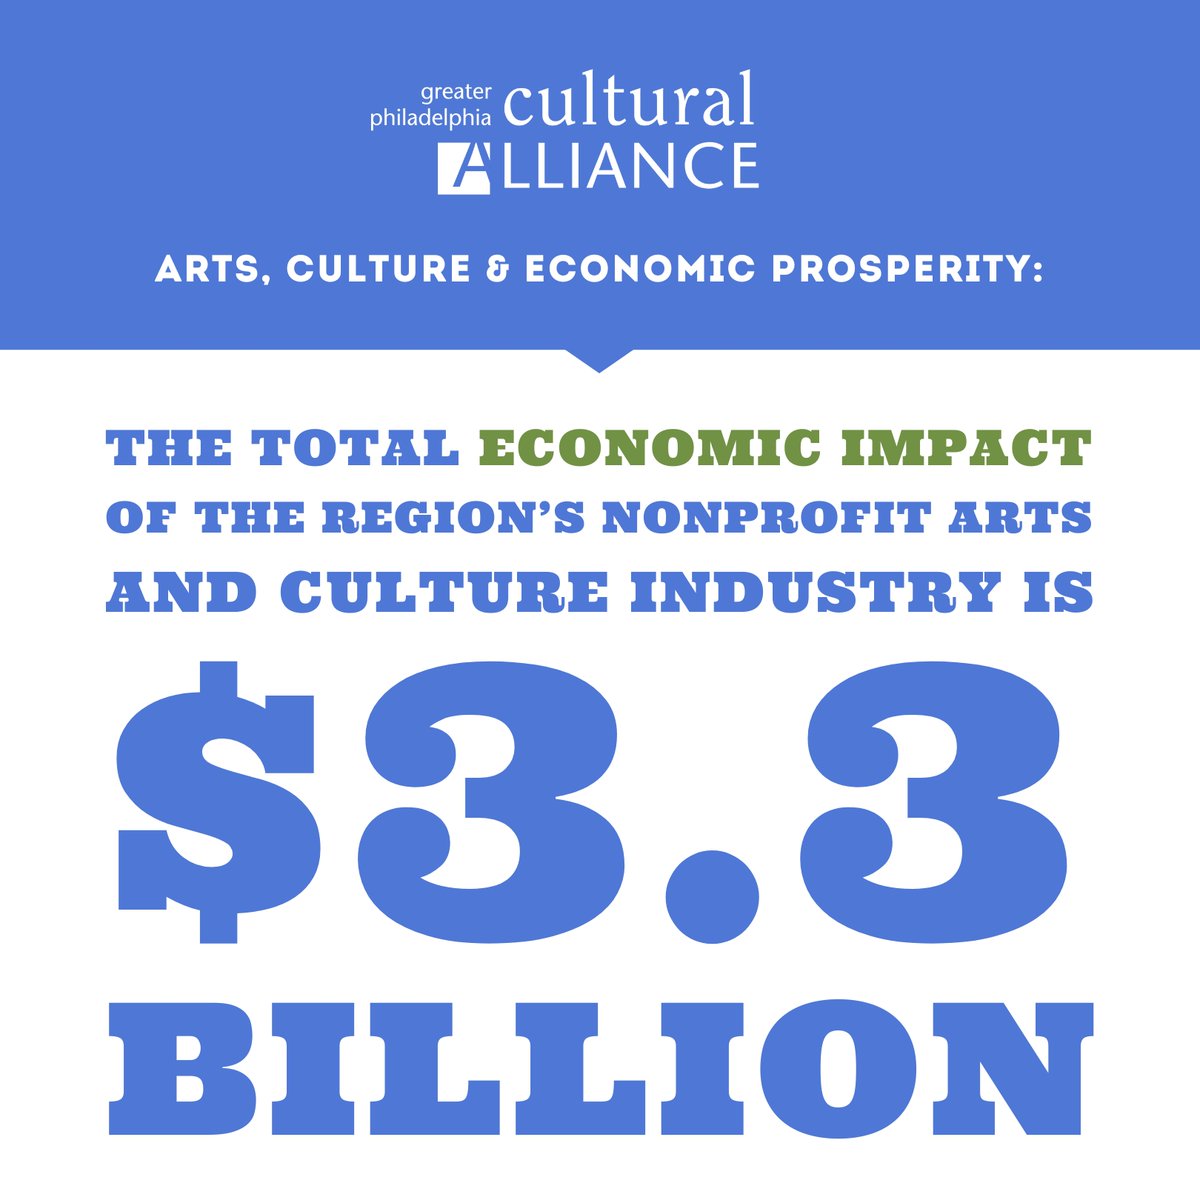 The total economic impact of the region’s nonprofit arts and culture industry is an impressive $3.3 billion. We break this down into several pieces, including direct and indirect/induced spending, and more. Learn more at: philaculture.org/prosperity with @PAHumanities